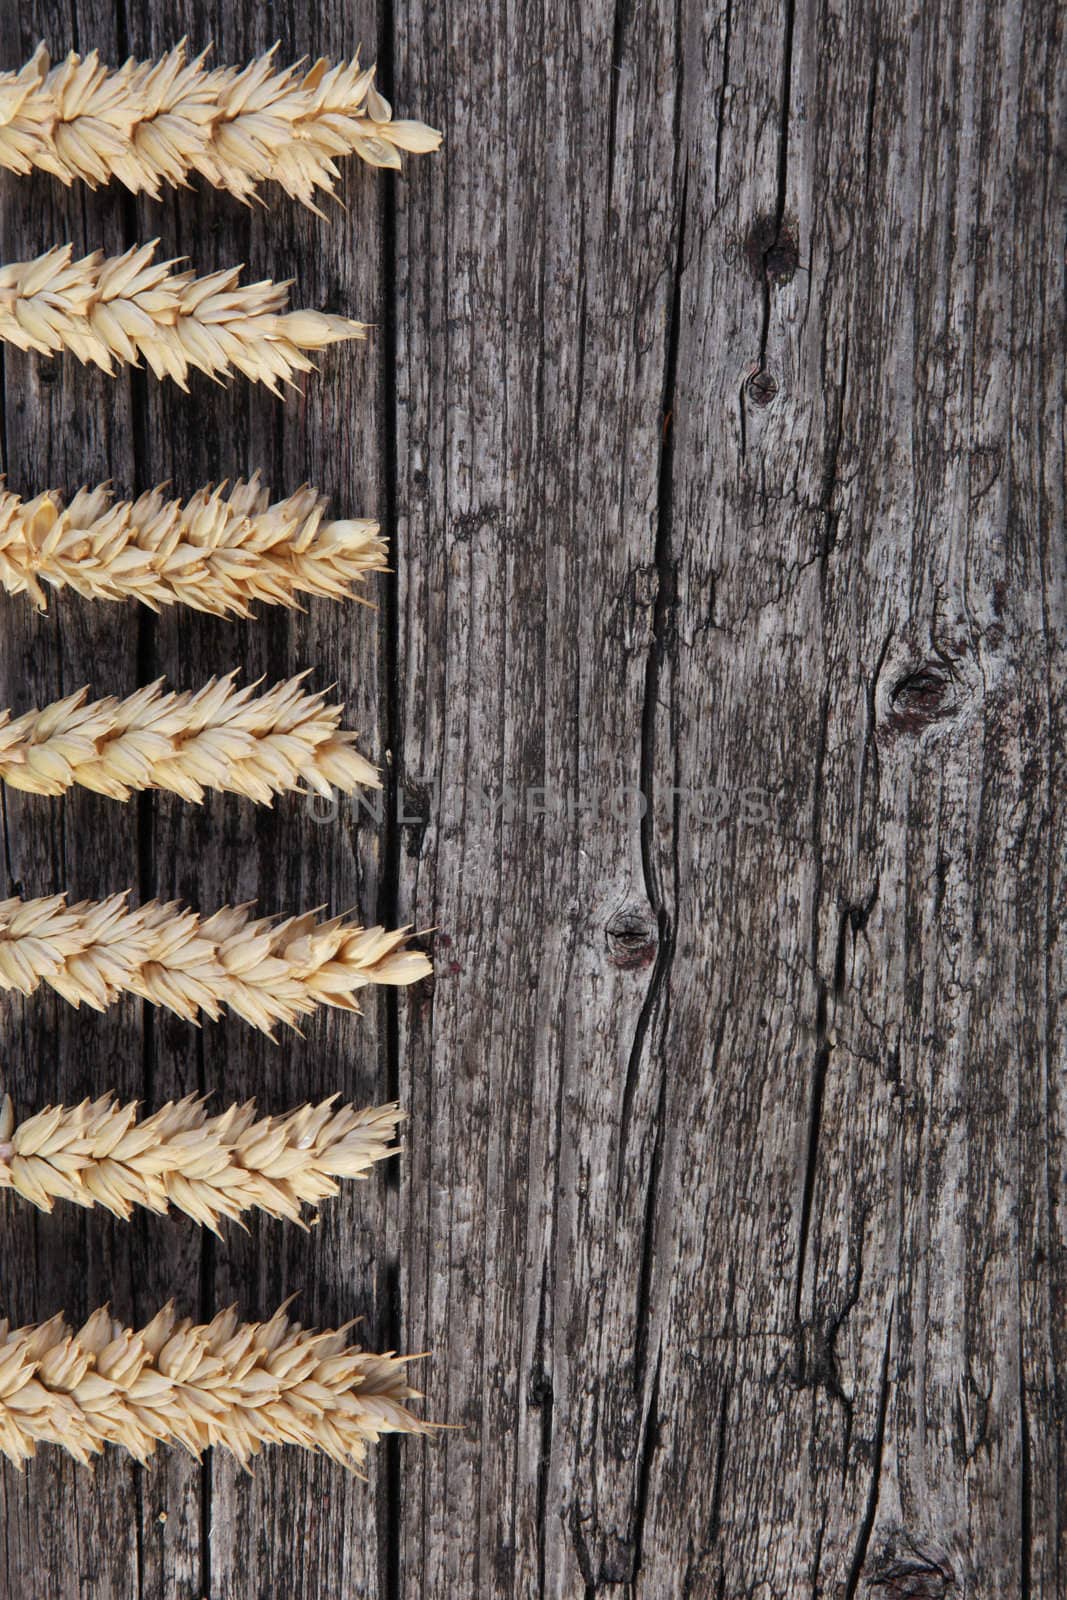 Ears of wheat arranged in a spaced row to the left on old stained and cracked wooden boards with copy space